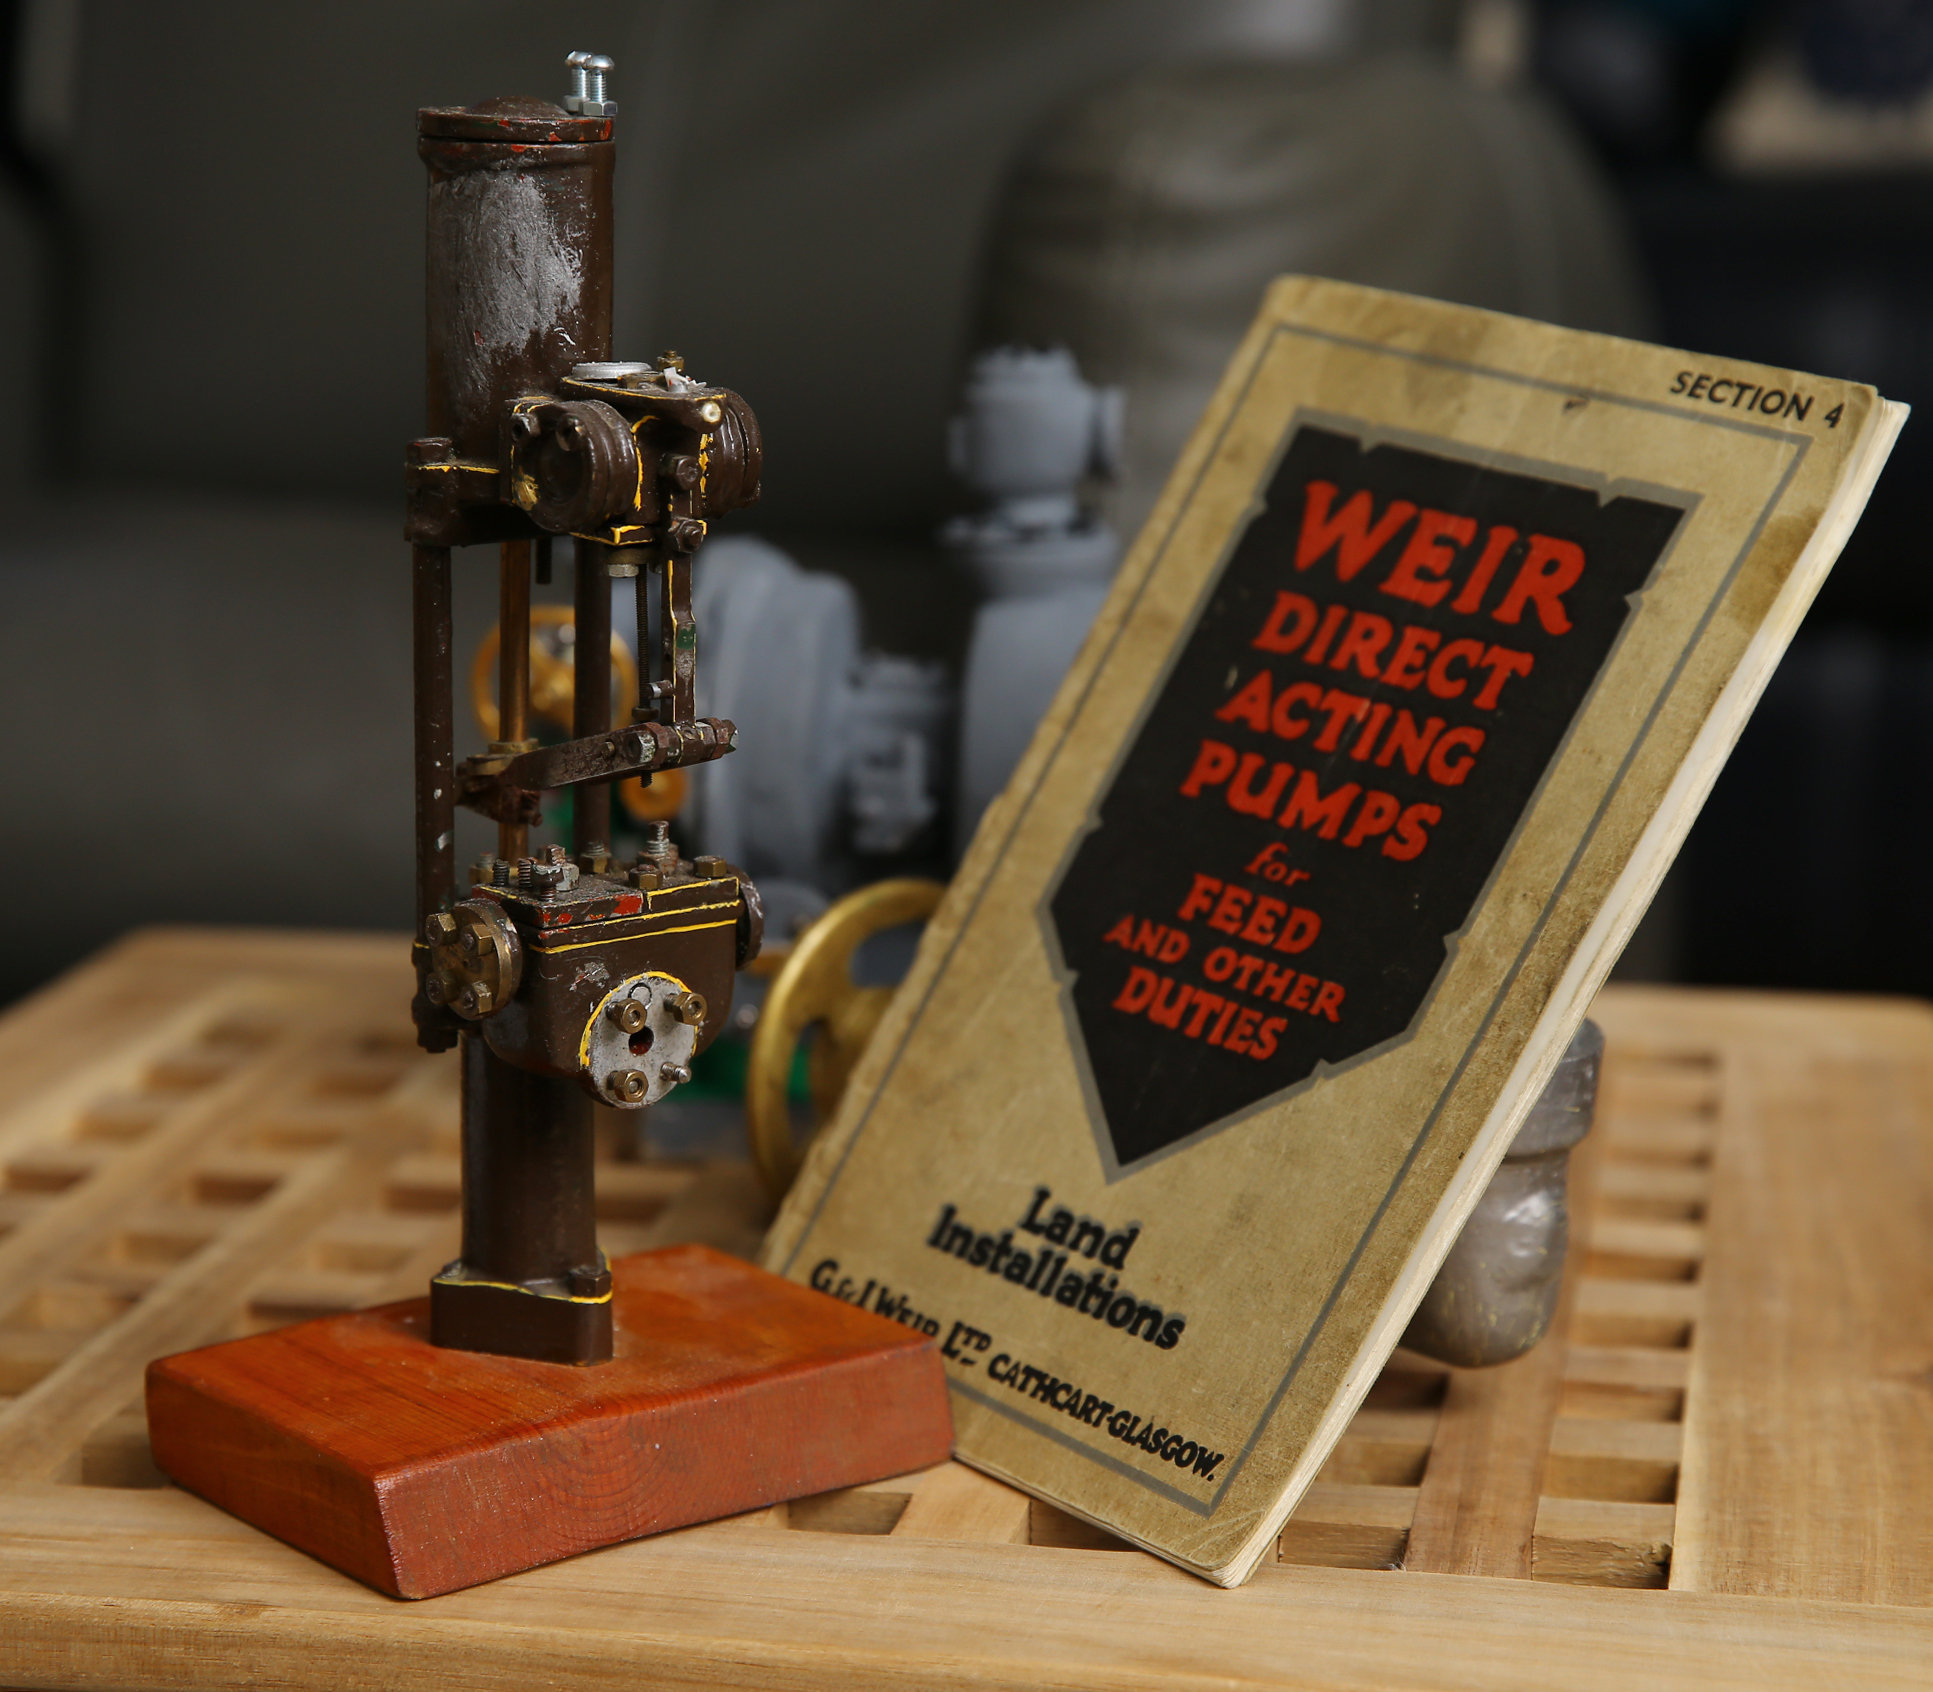 A 1/4 scale model of a Weir direct acting steam pump made by Doug Michael. Doug is an engineer who used to work at Weirs is writing a book about Glasgow’s famous Weirs of Cathcart... Photograph by Colin Mearns.24 February 2021.For GT Times Past,